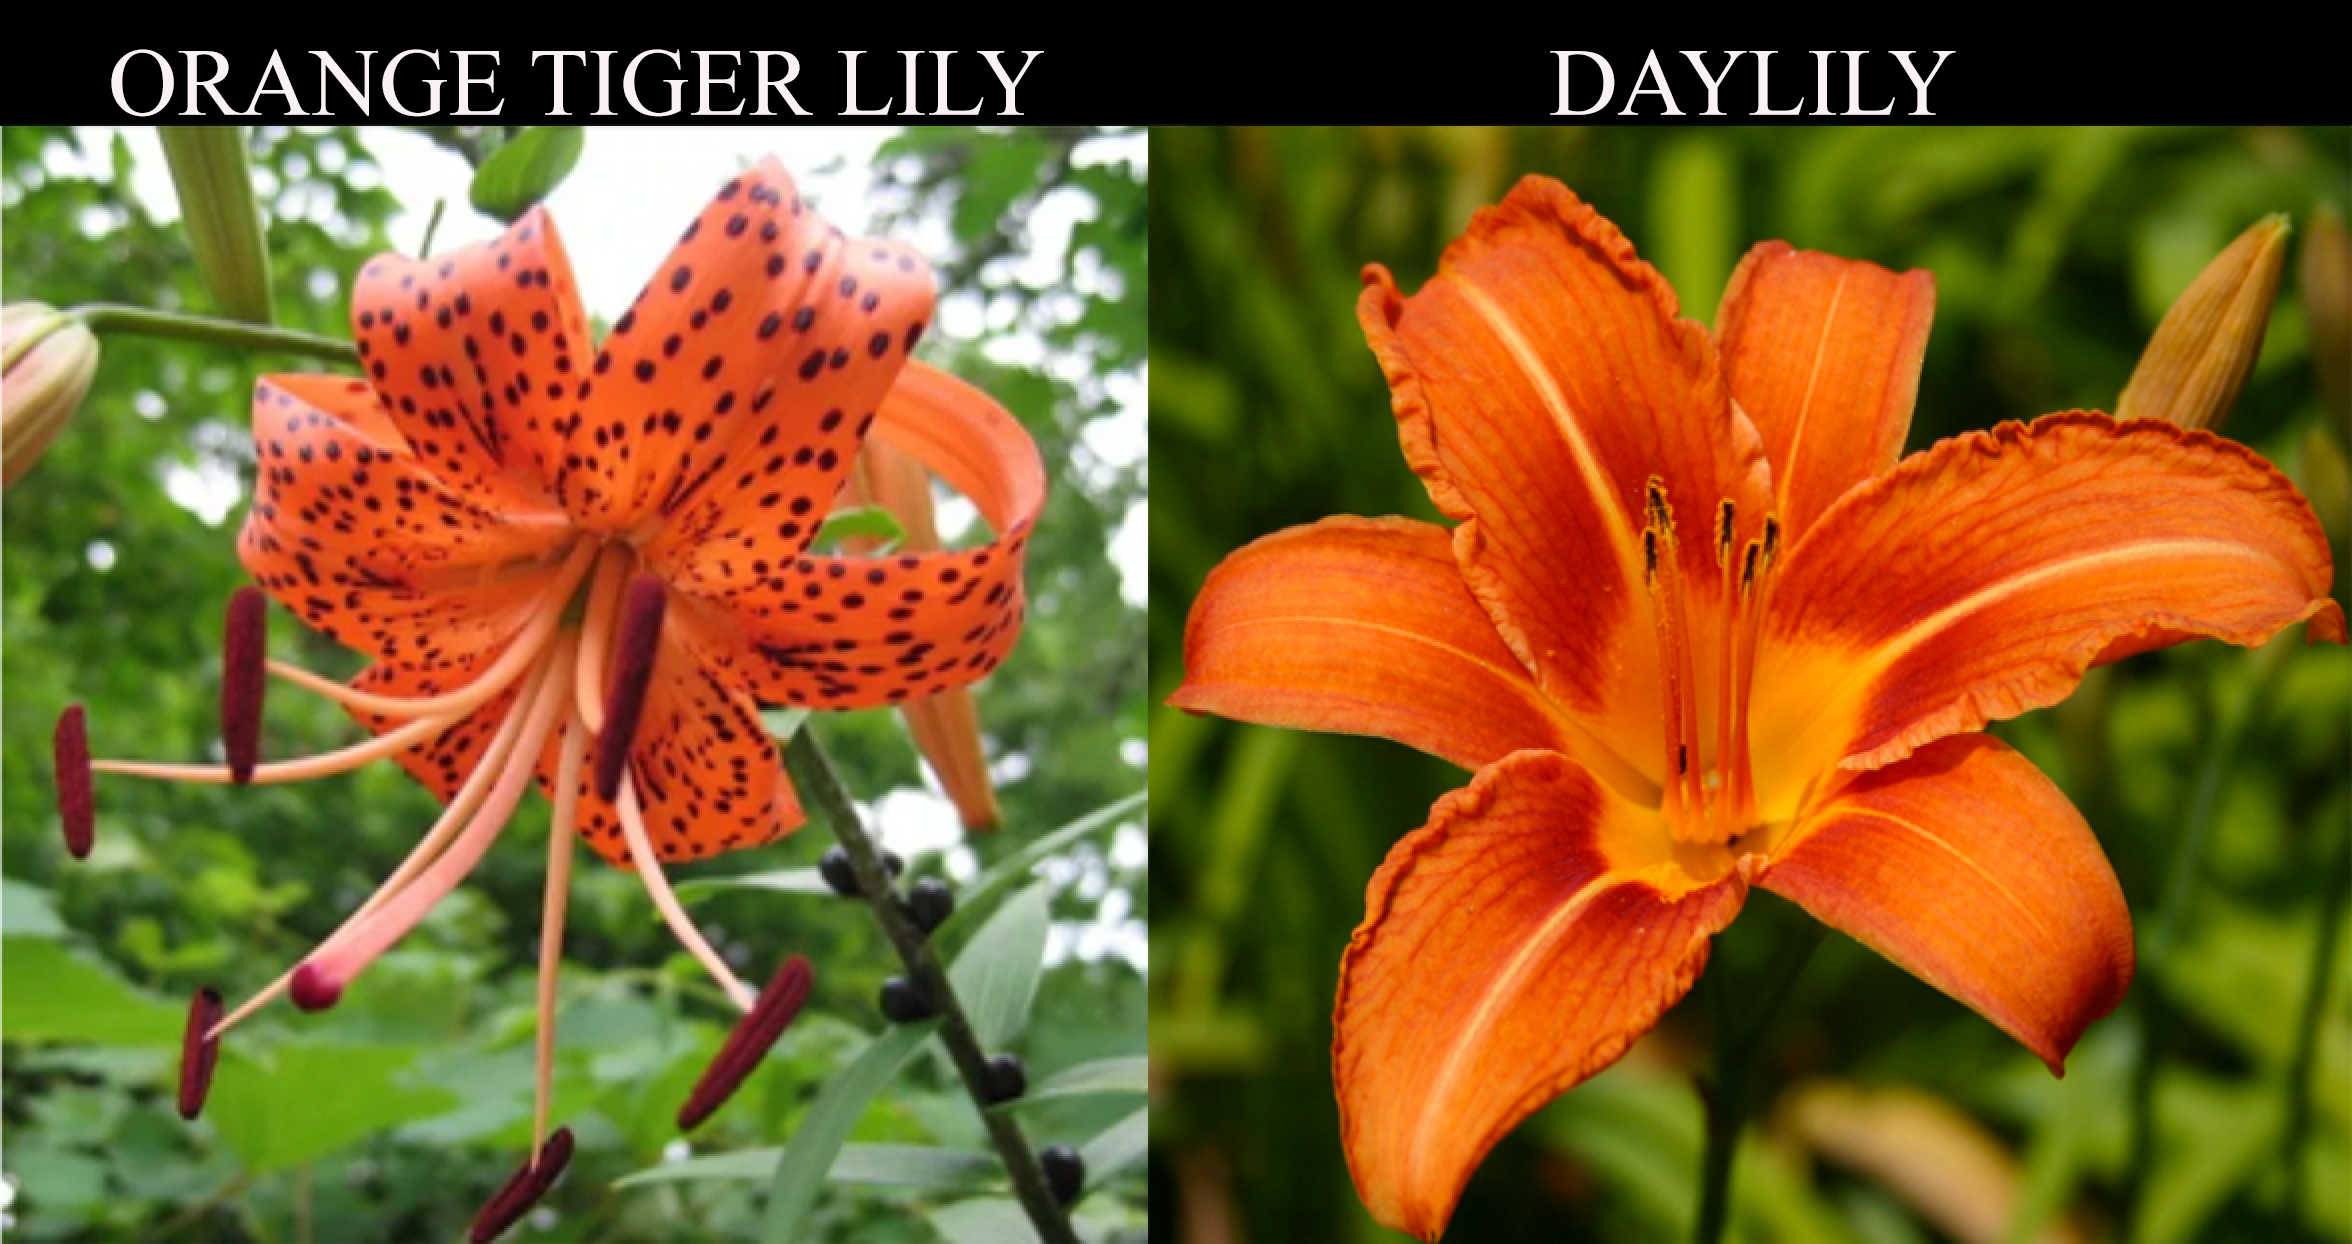 Difference Between Orange Tiger Lily ad Daylily